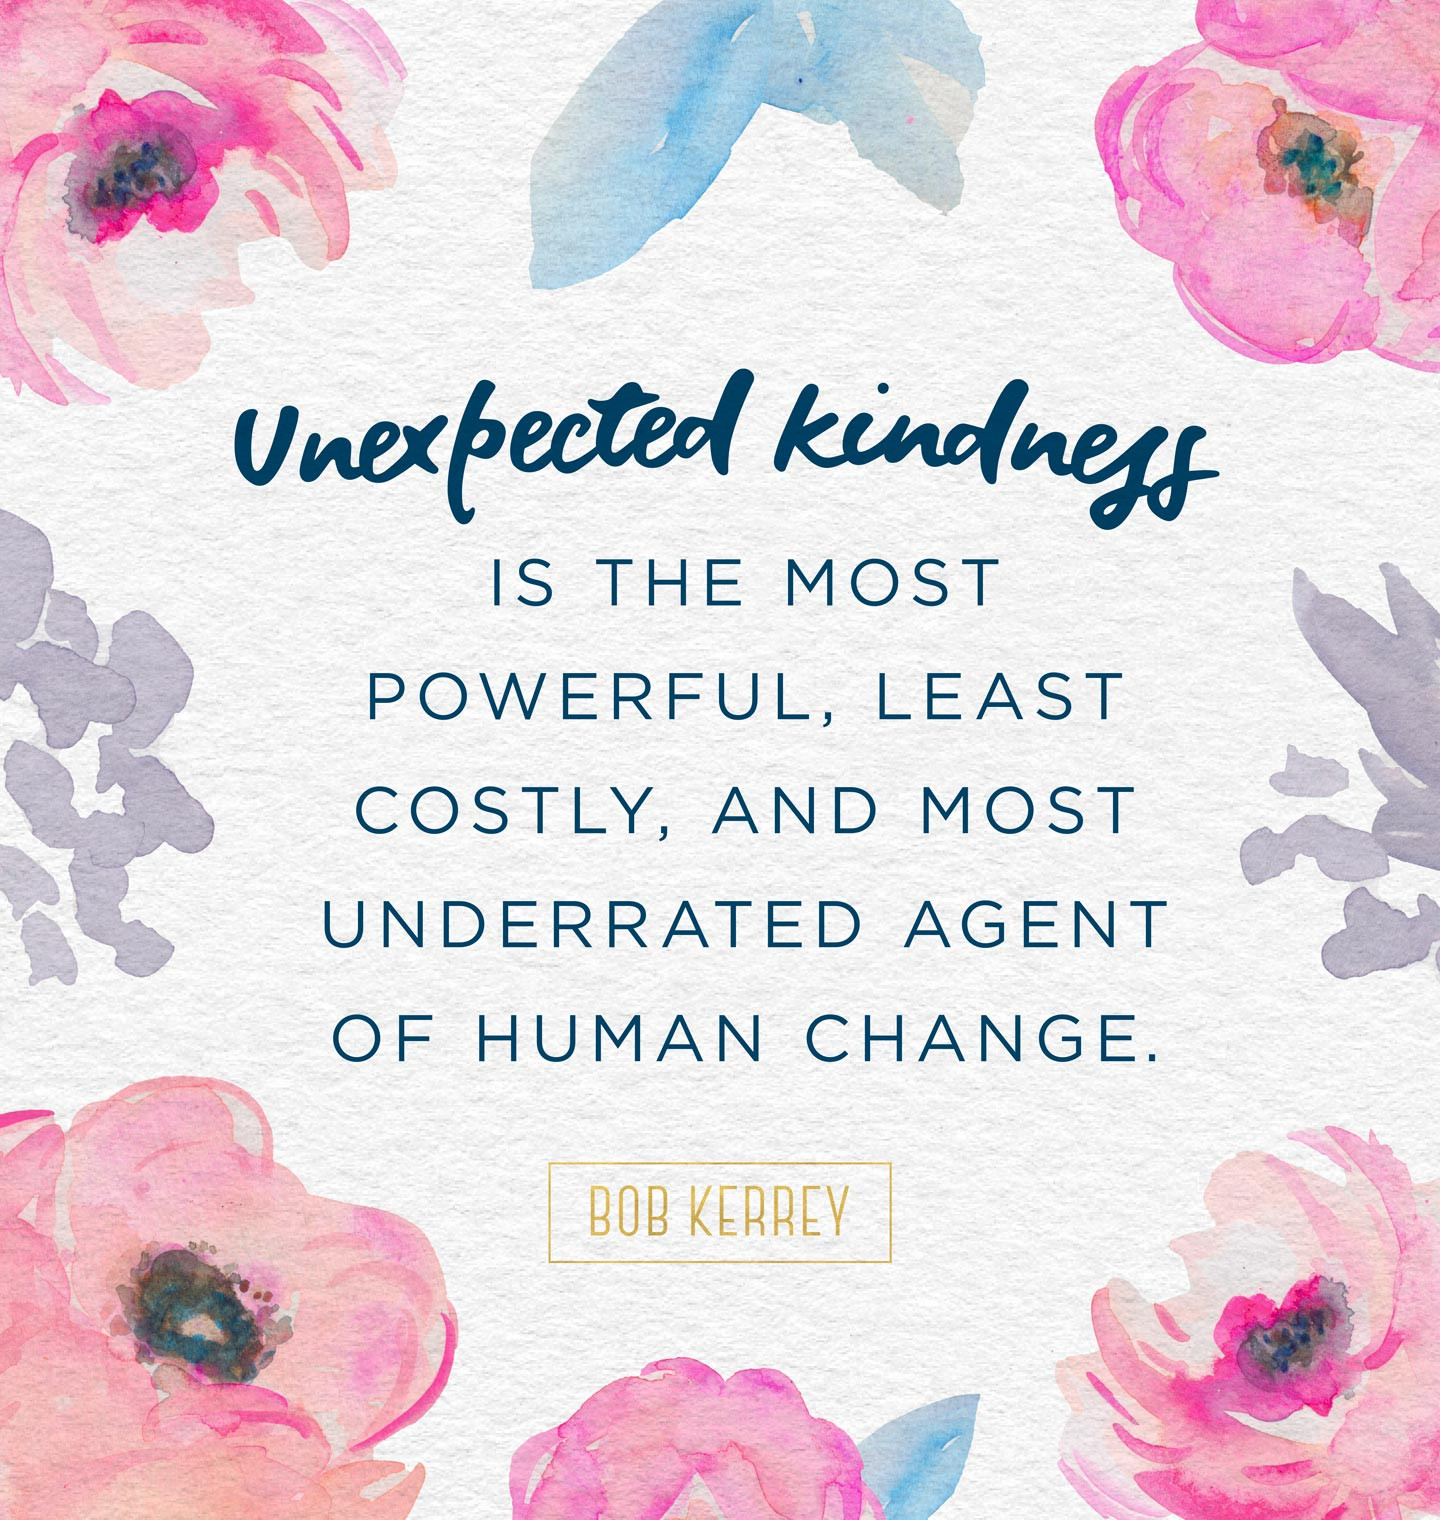 Short Kindness Quotes
 30 Inspiring Kindness Quotes That Will Enlighten You FTD